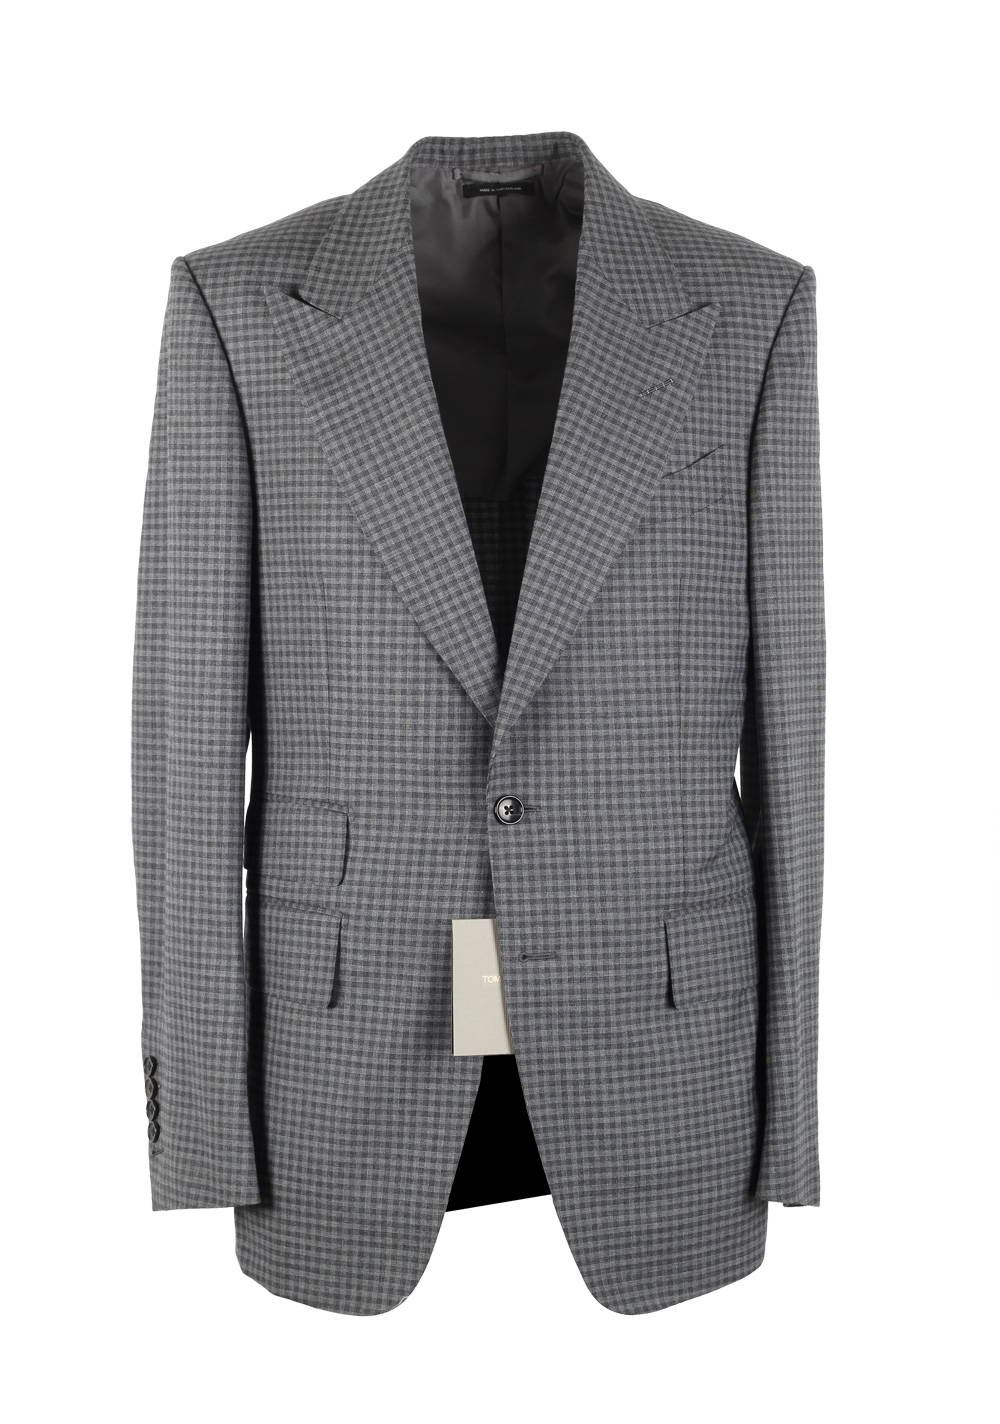 TOM FORD Shelton Checked Gray Suit Size 48 / 38R U.S. In Wool | Costume ...